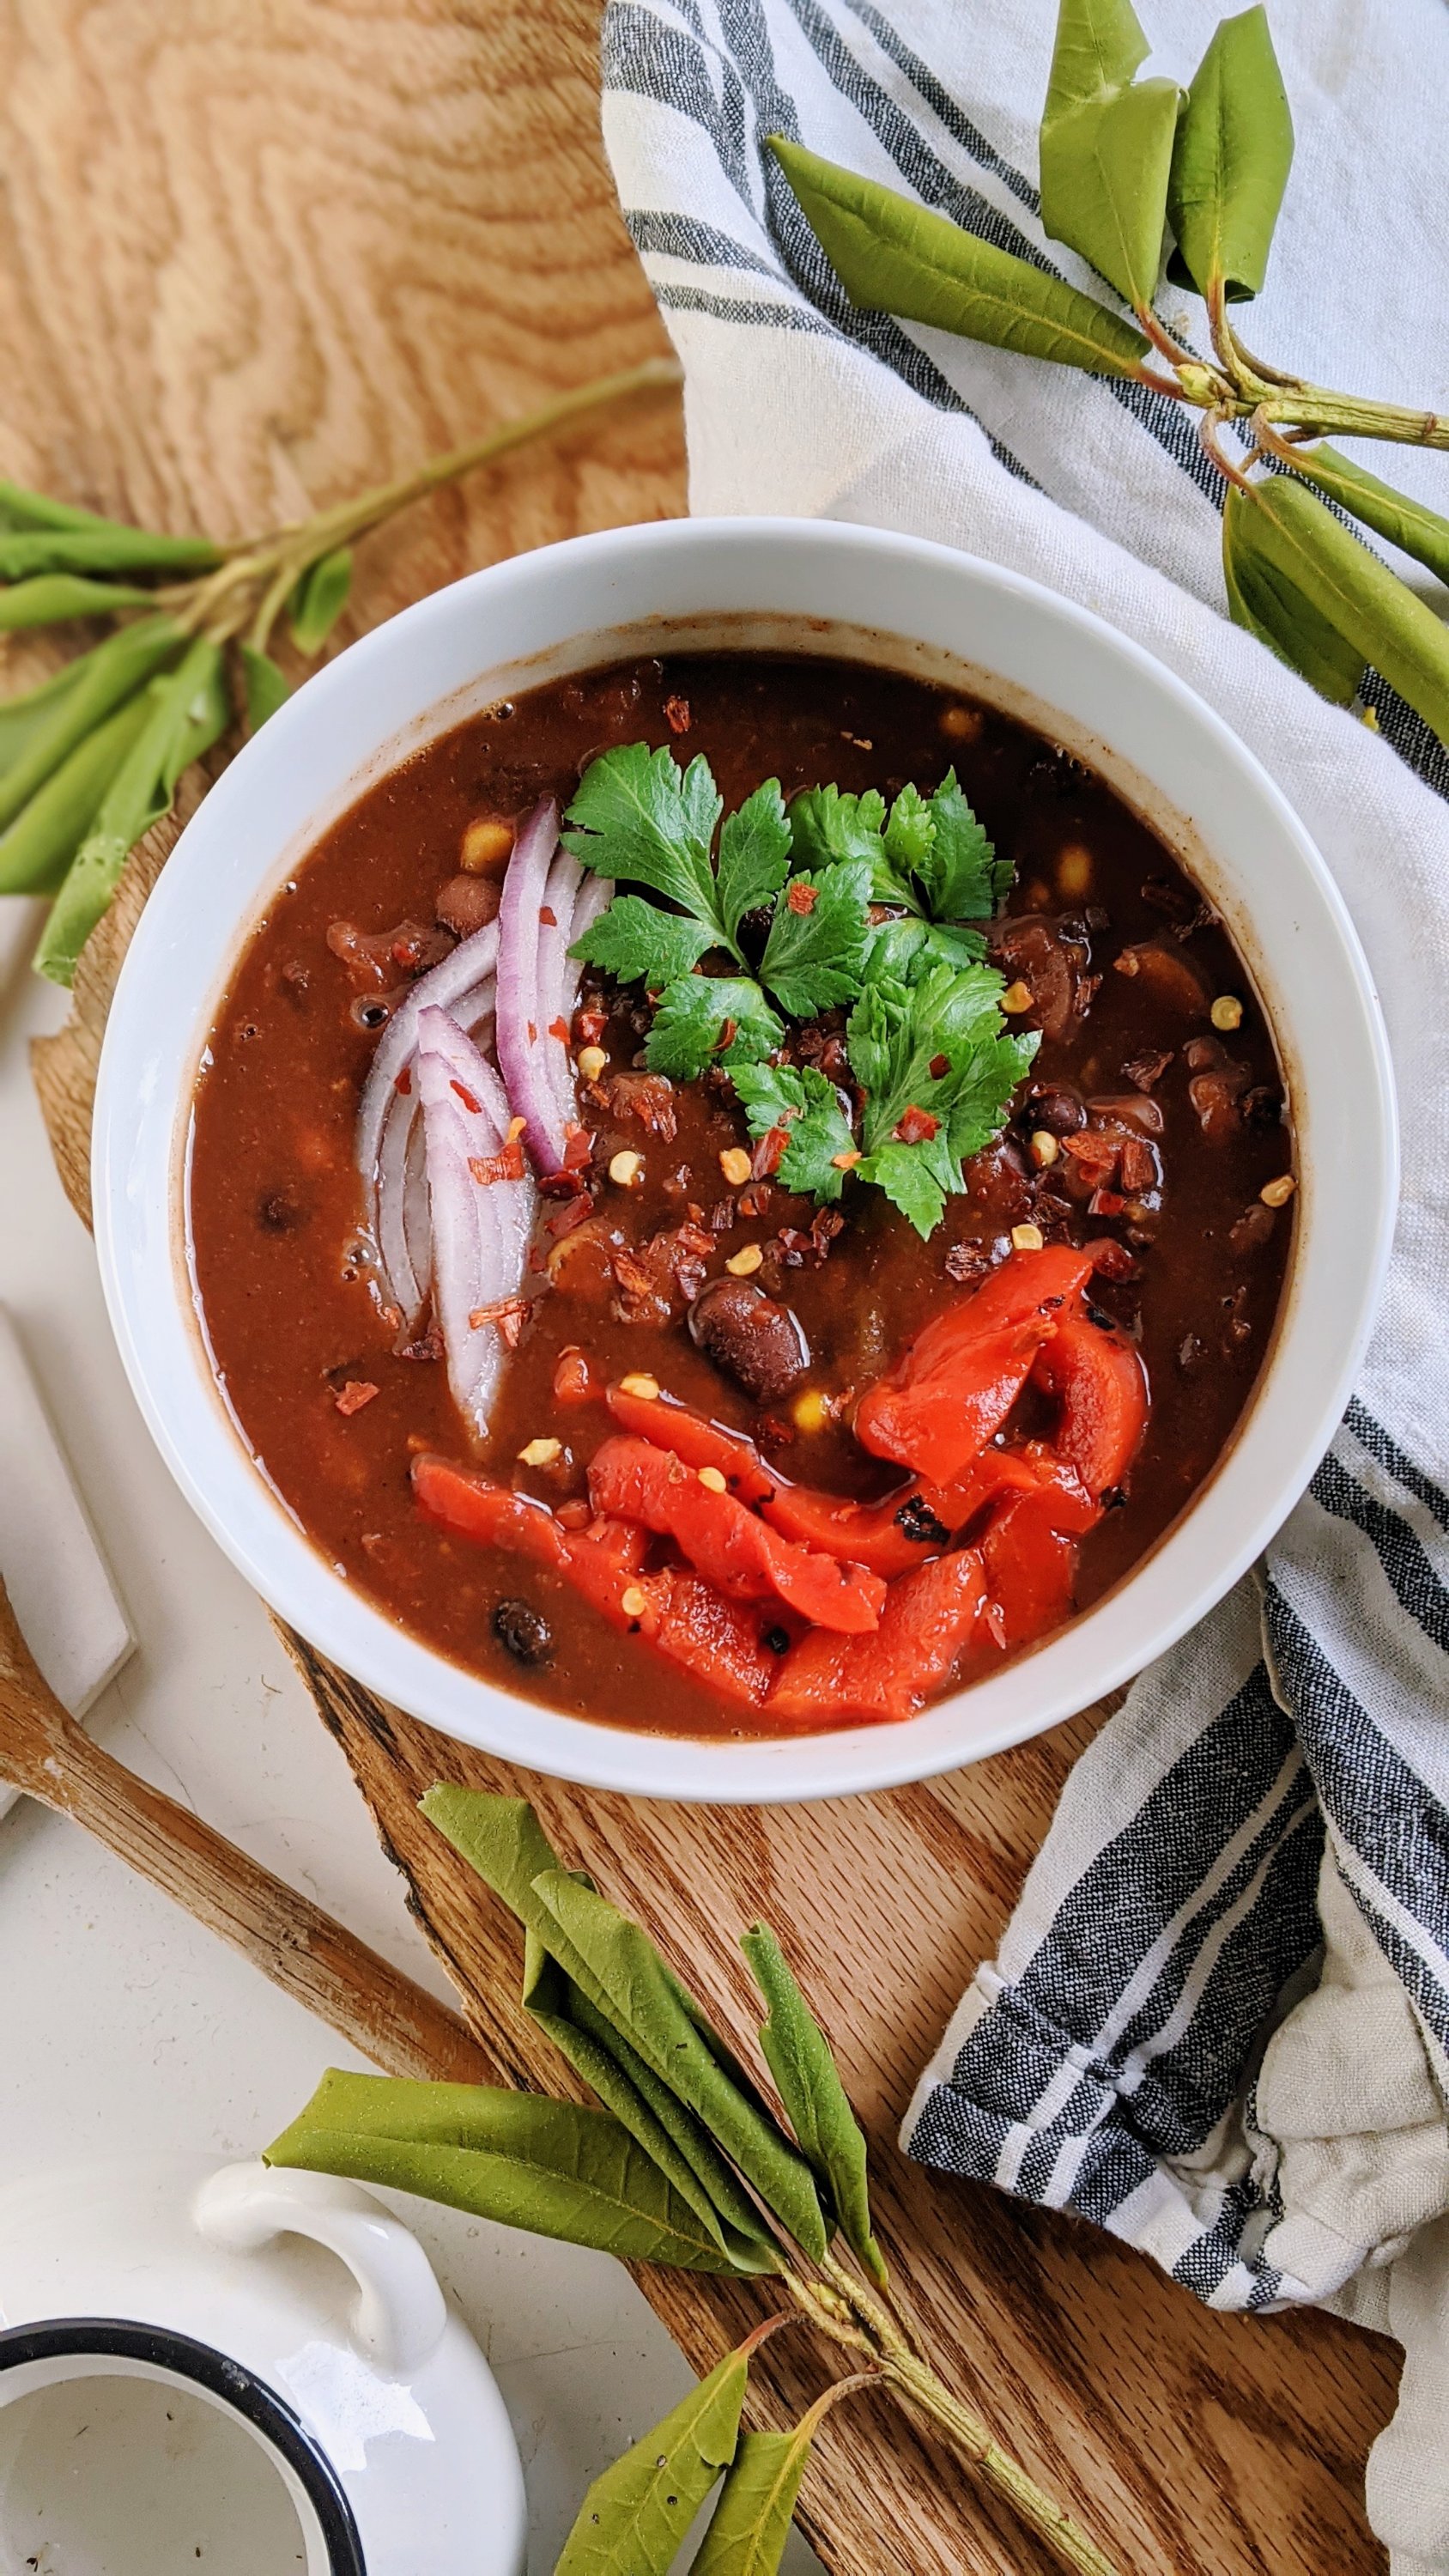 chili with black beans pinto beans kidney beans recipe vegan gluten free vegetarian meatless veganuary chili recipes healthy slow cooker crock pot instant pot pressure cooker chilis